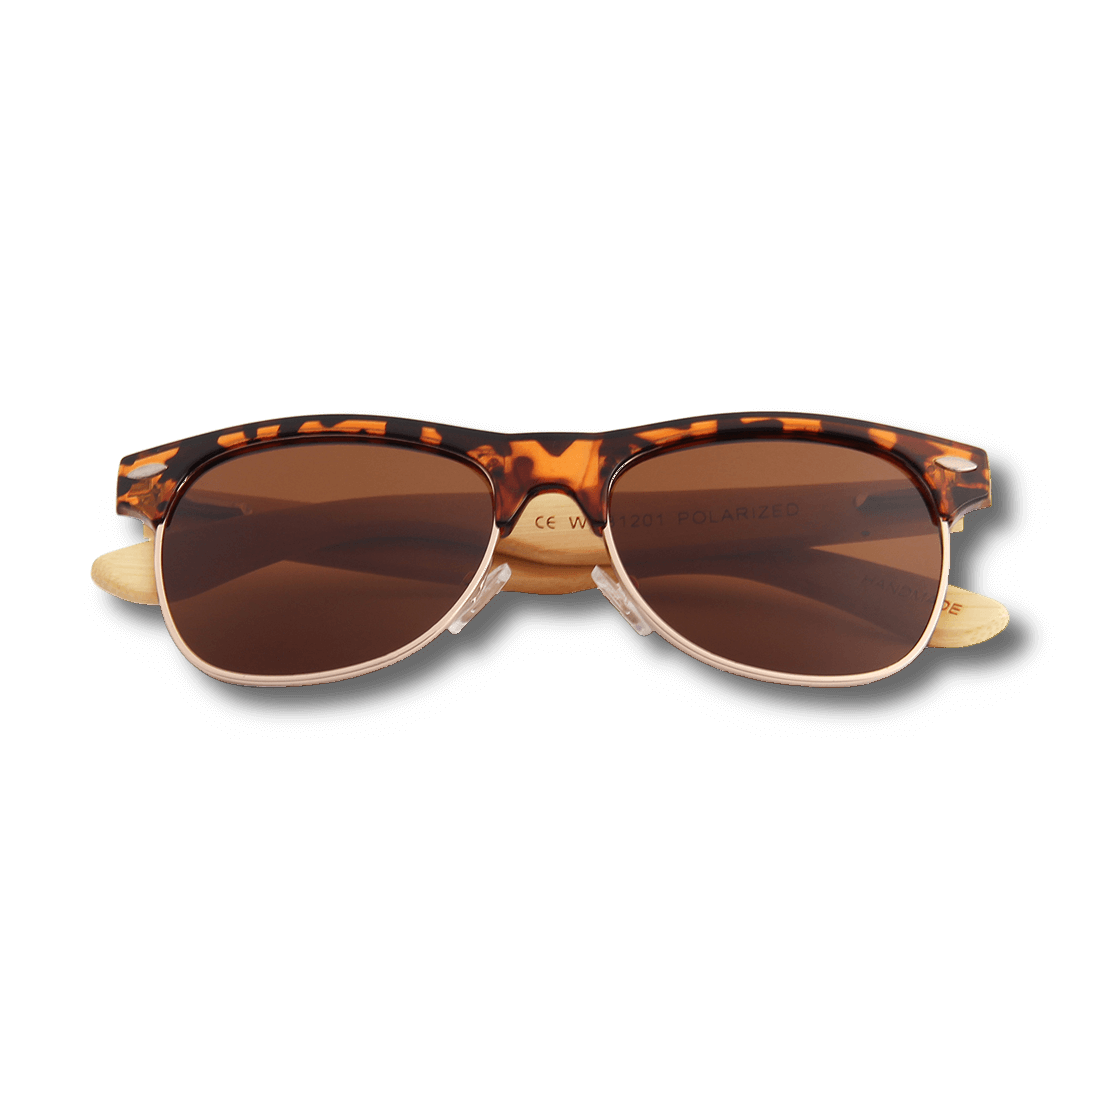 Real Bamboo Tortoise Frame Browline Style RetroShade Sunglasses by WUDN, Sunglasses - WUDN